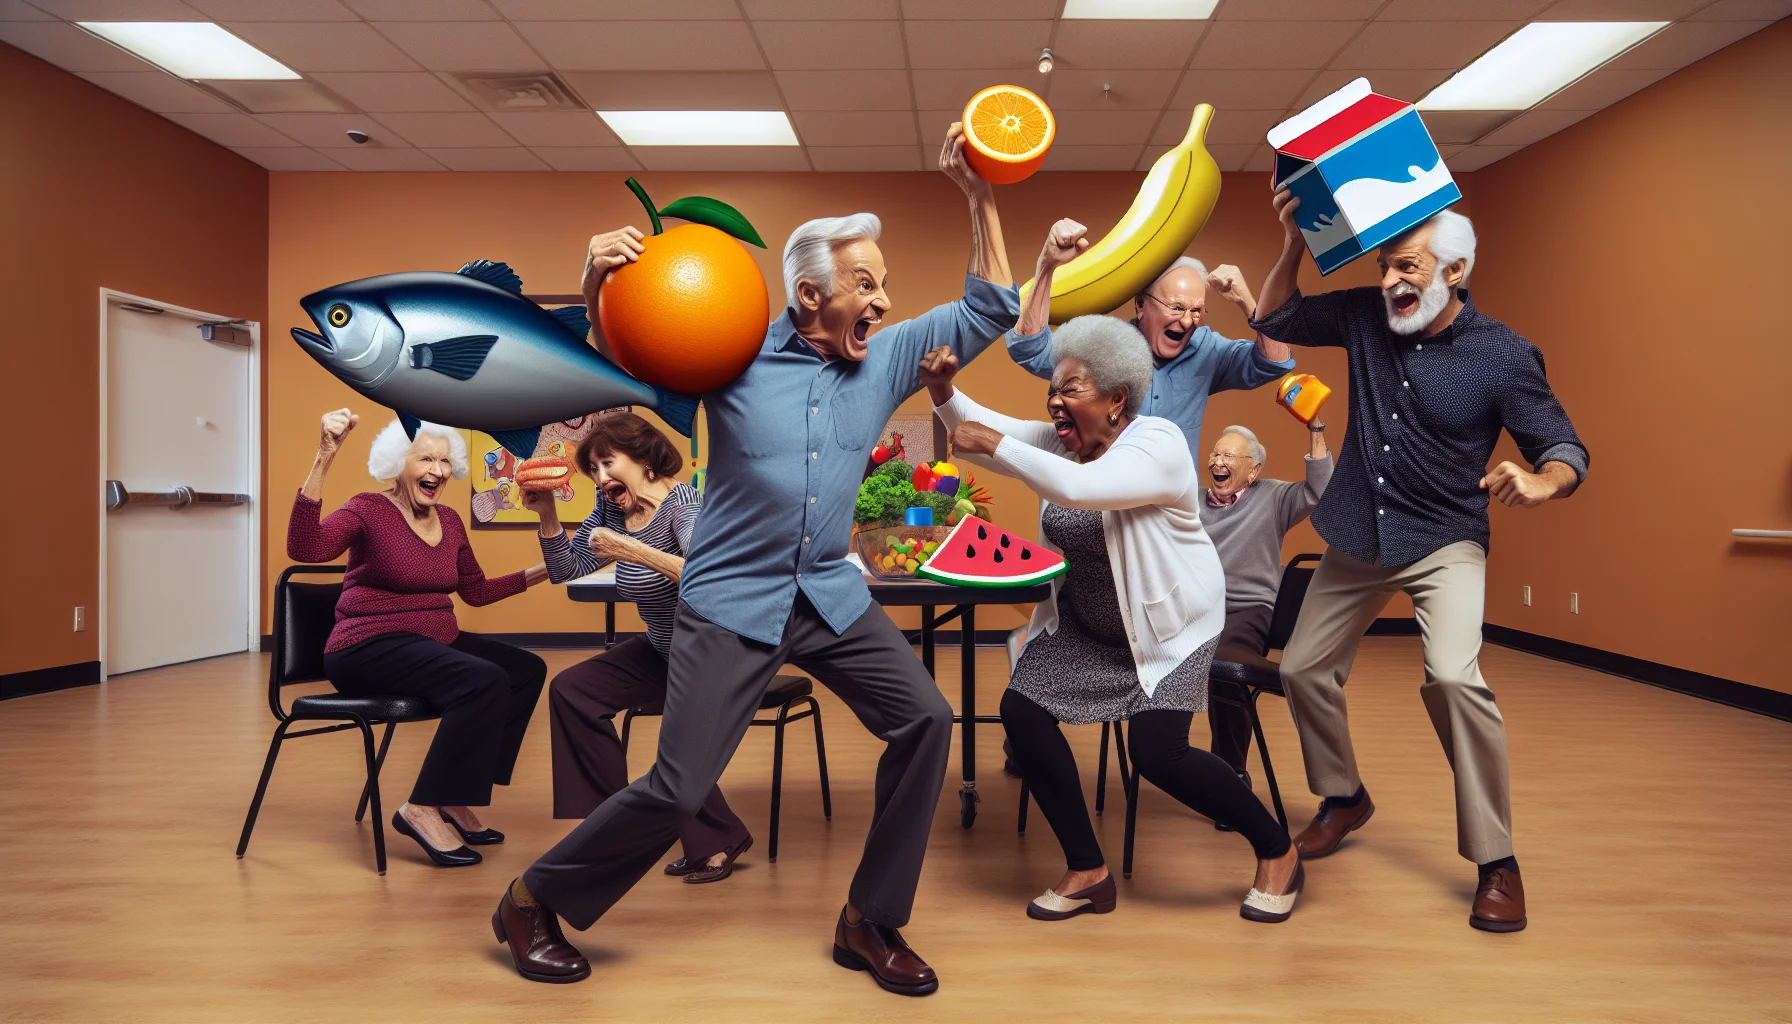 Compose an image that humorously illustrates the best nutritional supplements for elderly individuals. Envision a lively scenario at a community center with seniors of diverse descents, like an African woman, an Asian man, a Caucasian woman, and a Middle Eastern man actively participating in a playful food fight. Each of them is armed with colorful food items, representing different vitamins and minerals - a giant omega-3 fish, a vitamin C orange, a calcium-rich milk carton, and a protein-packed steak, respectively. The background is filled with laughter and cheer, turning a typical mundane dietary discussion into an amusing, memorable event.